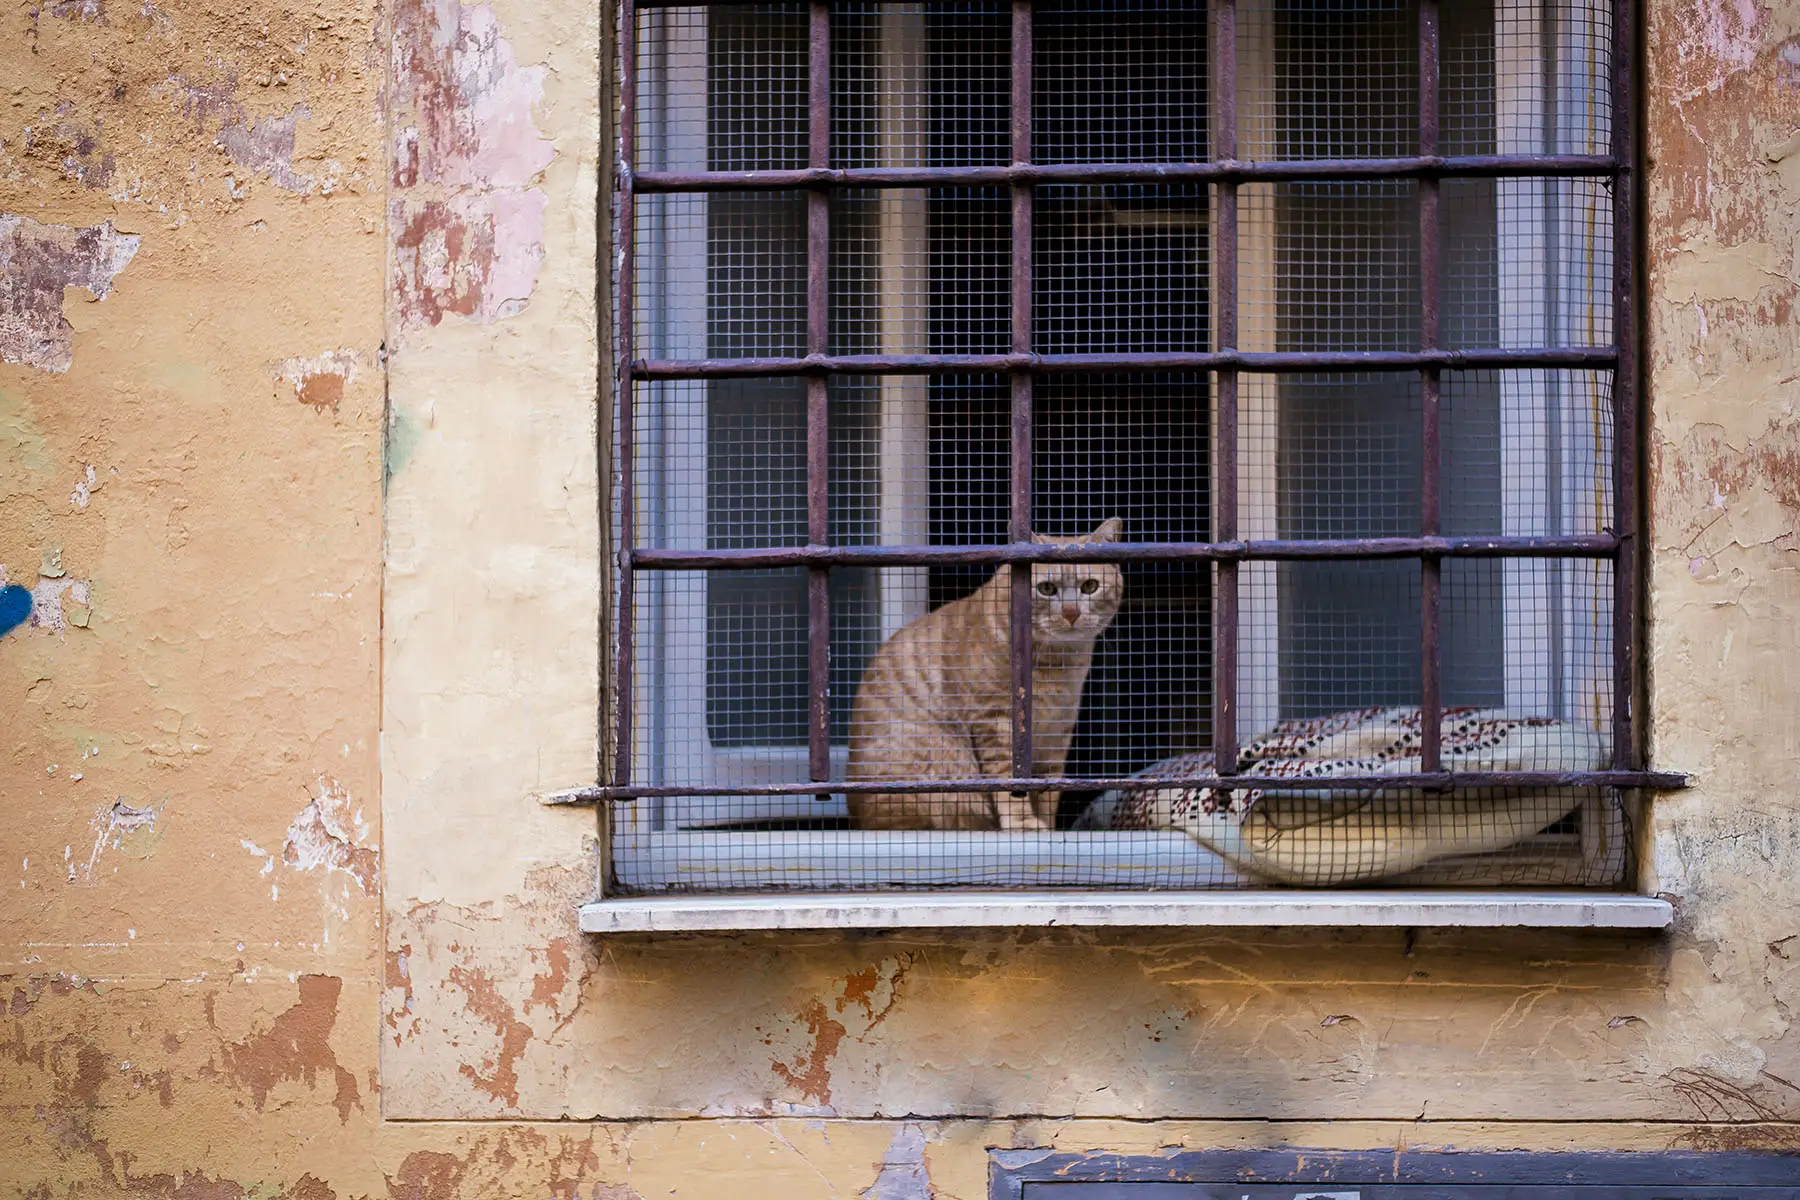 An orange cat sitting on the window sill behind bars and wire